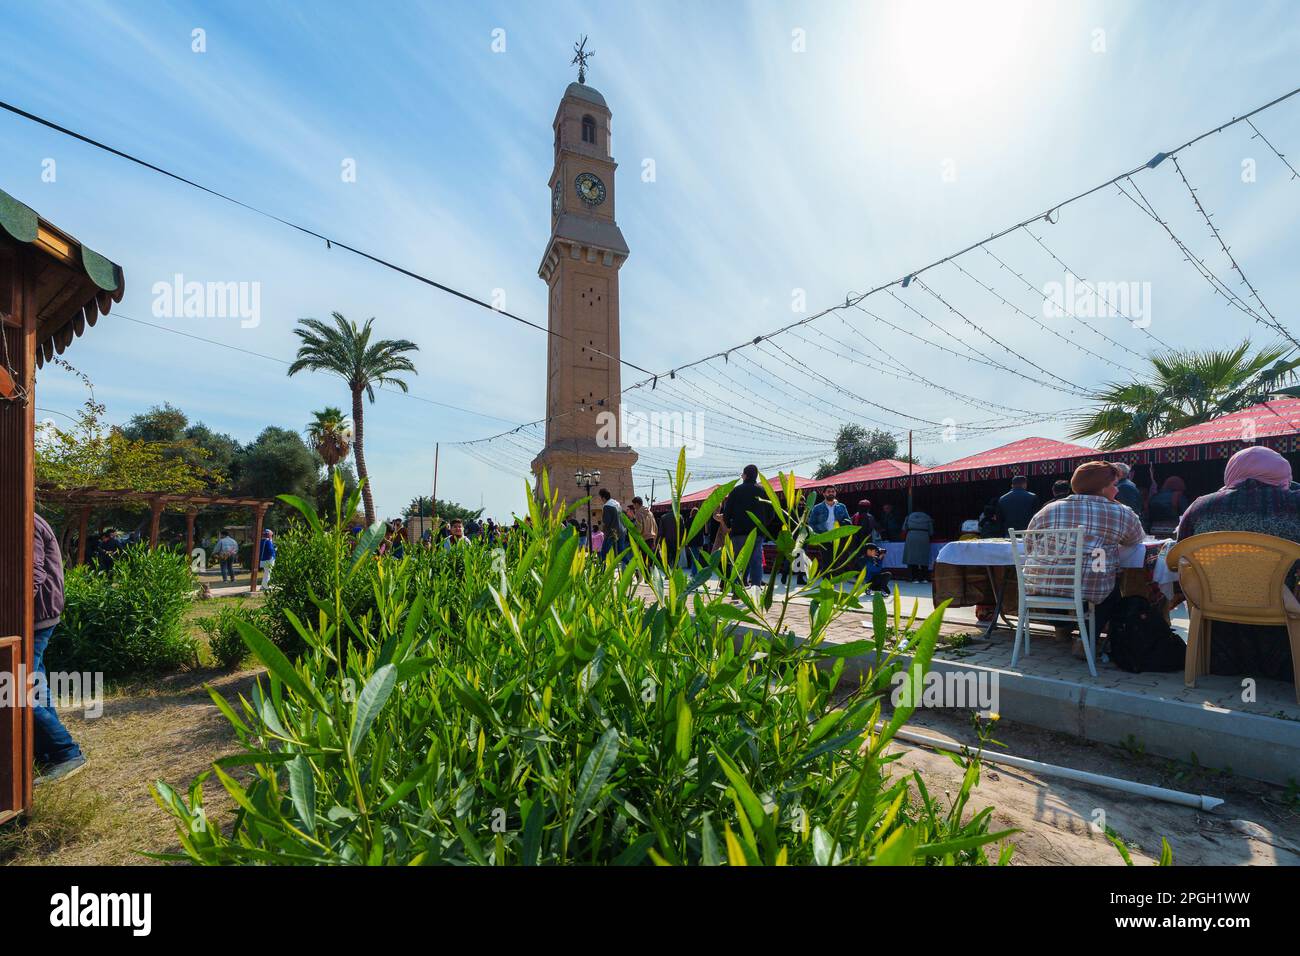 Baghdad, Iraq - Feb 10, 2023: Landscape Wide View of Al-Qishla or Qushleh Clock Tower. It is an Iraq Historical Landmark, which was Built during the r Stock Photo